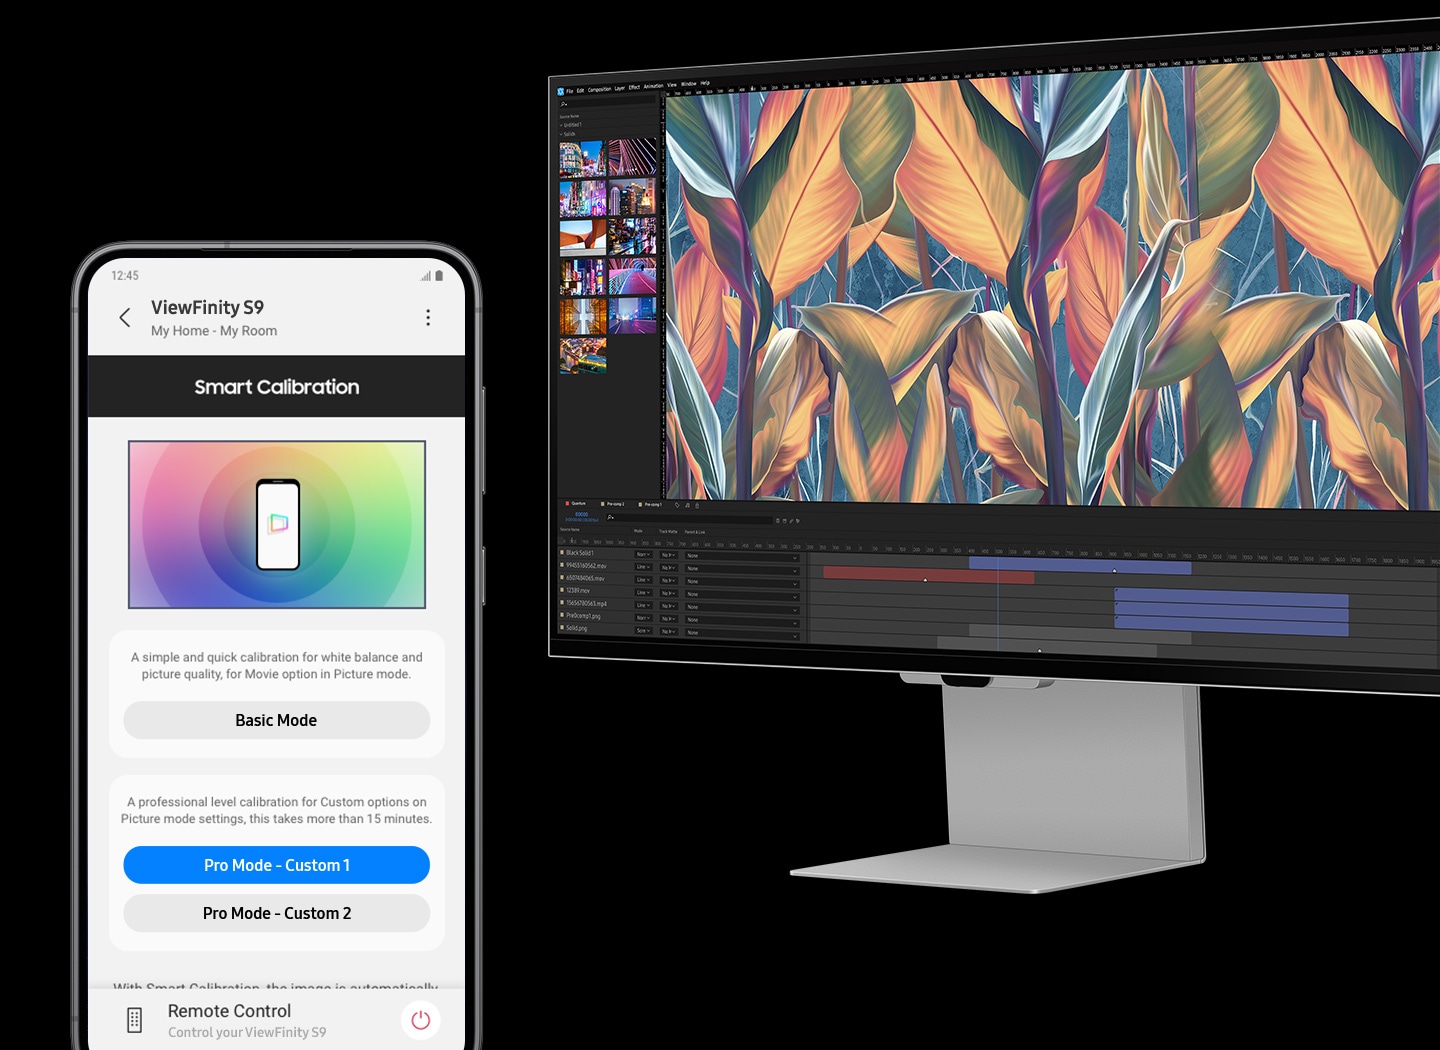 There is a monitor with an abstract image. Next to it, there's a mobile phone, and a pro mode is selected on the phone for smart calibration. Then, the monitor is being calibrated. After the calibration, the image on the monitor gets more vivid and colorful.